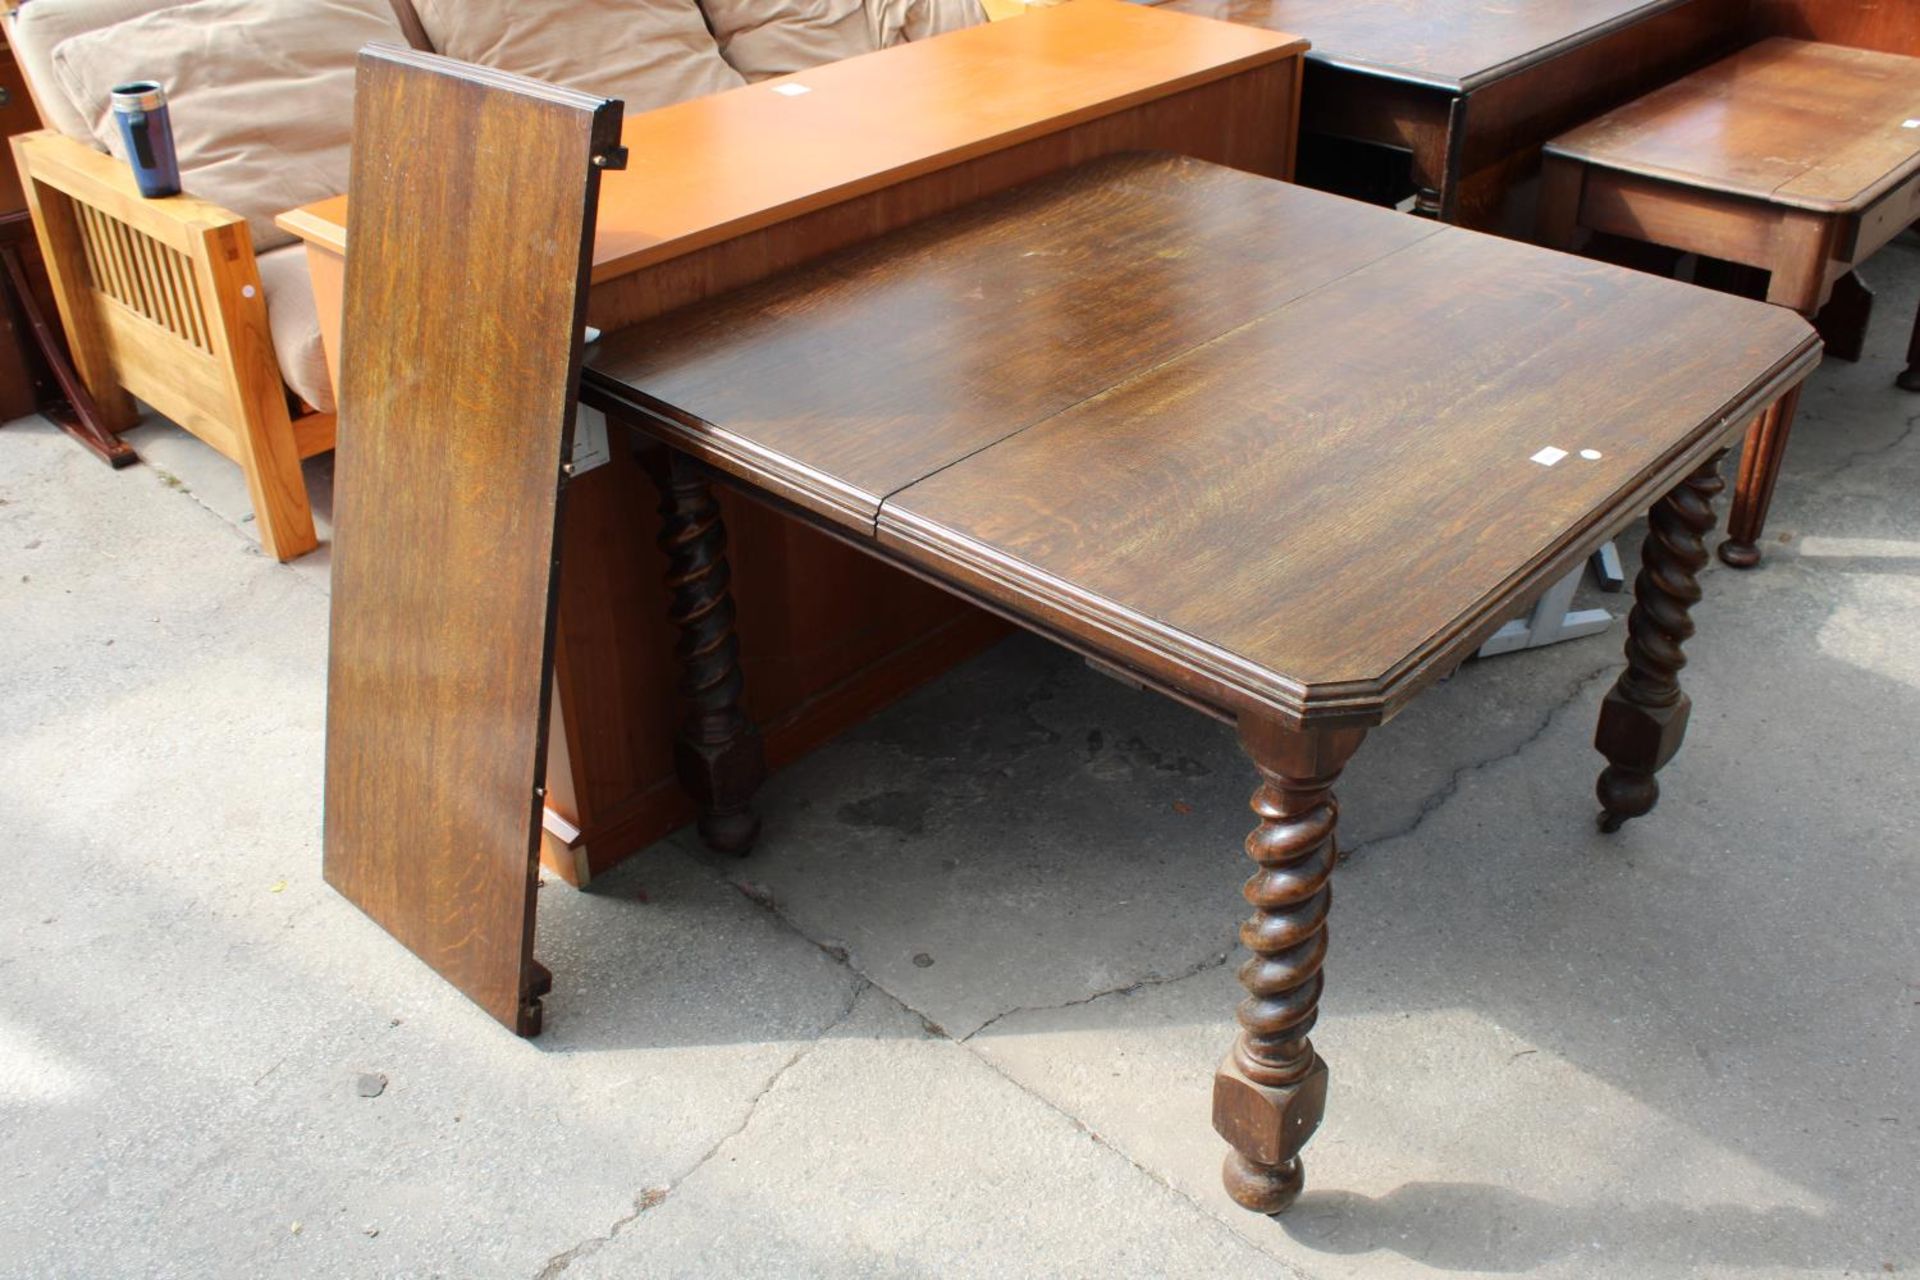 AN EARLY 20TH CENTURY OAK EXTENDING DINING TABLE ON BARLEY-TWIST LEGS WITH CANTED CORNERS, 41"